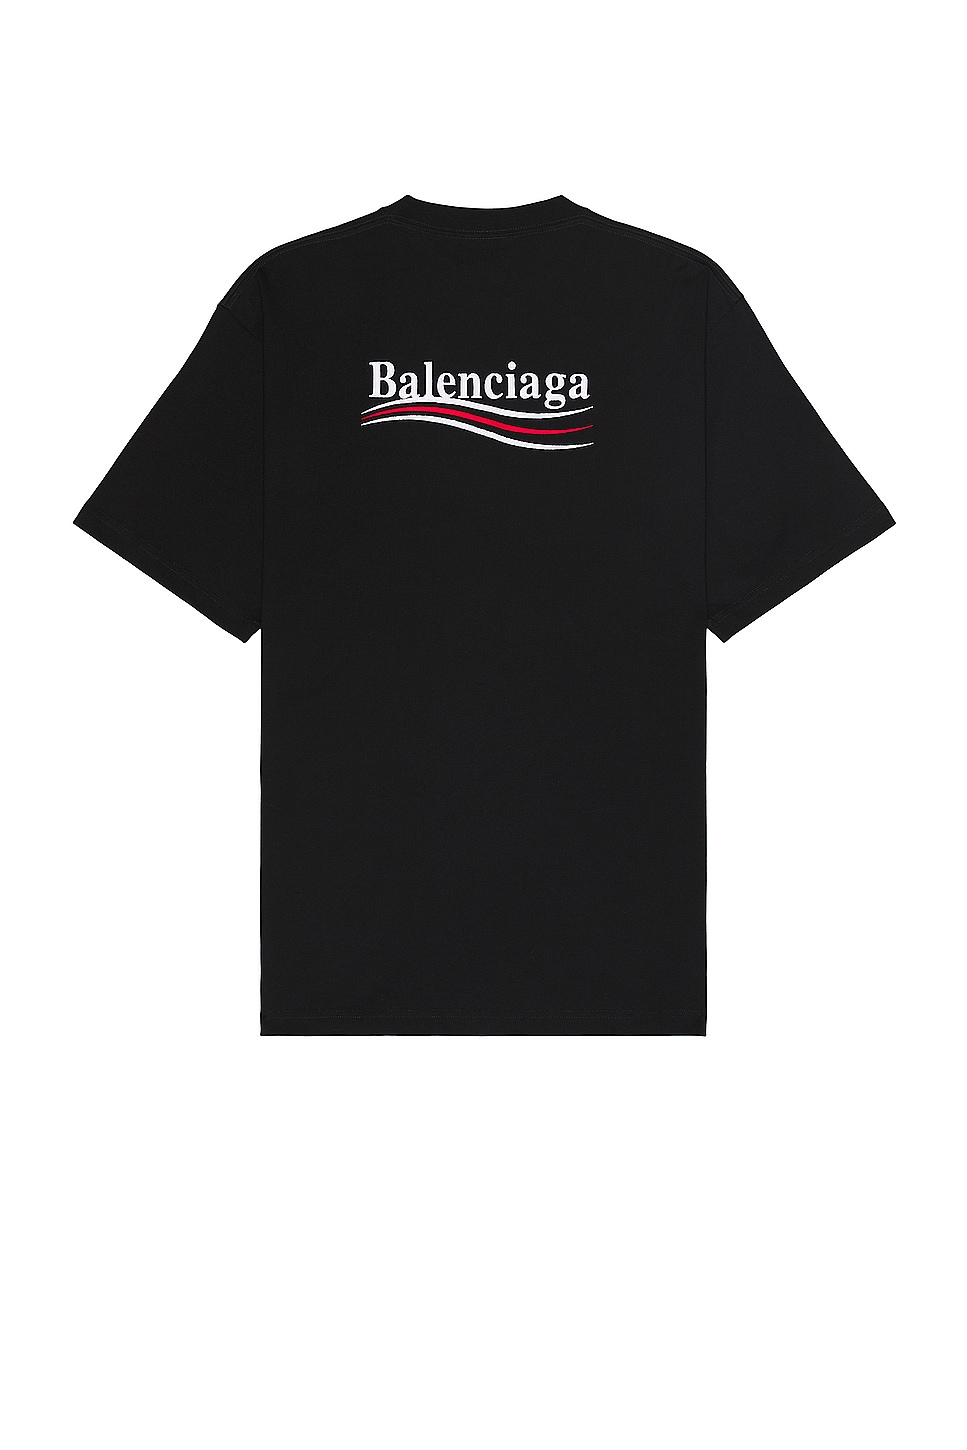 Image 1 of Balenciaga Large Fit T-shirt in Black & White